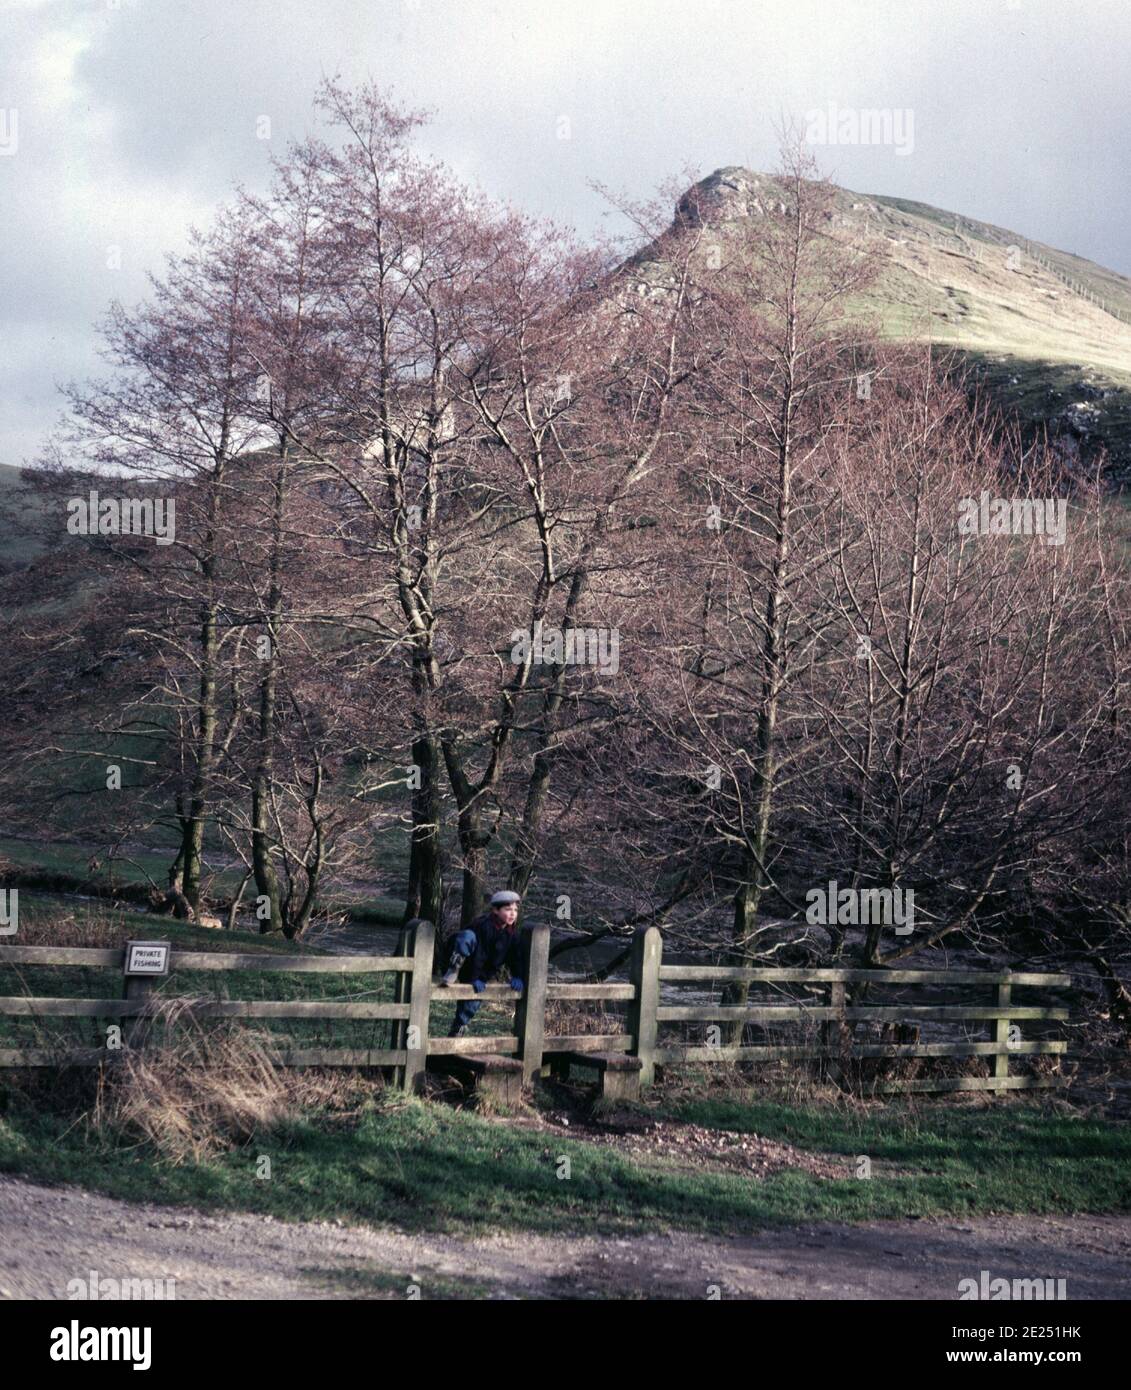 The much visited hill of Thorpe Cloud in Dovedale, near the town of Ashbourne in Derbyshire'  The ashes of Kenny Everett were scattered from the top of the hill. Stock Photo